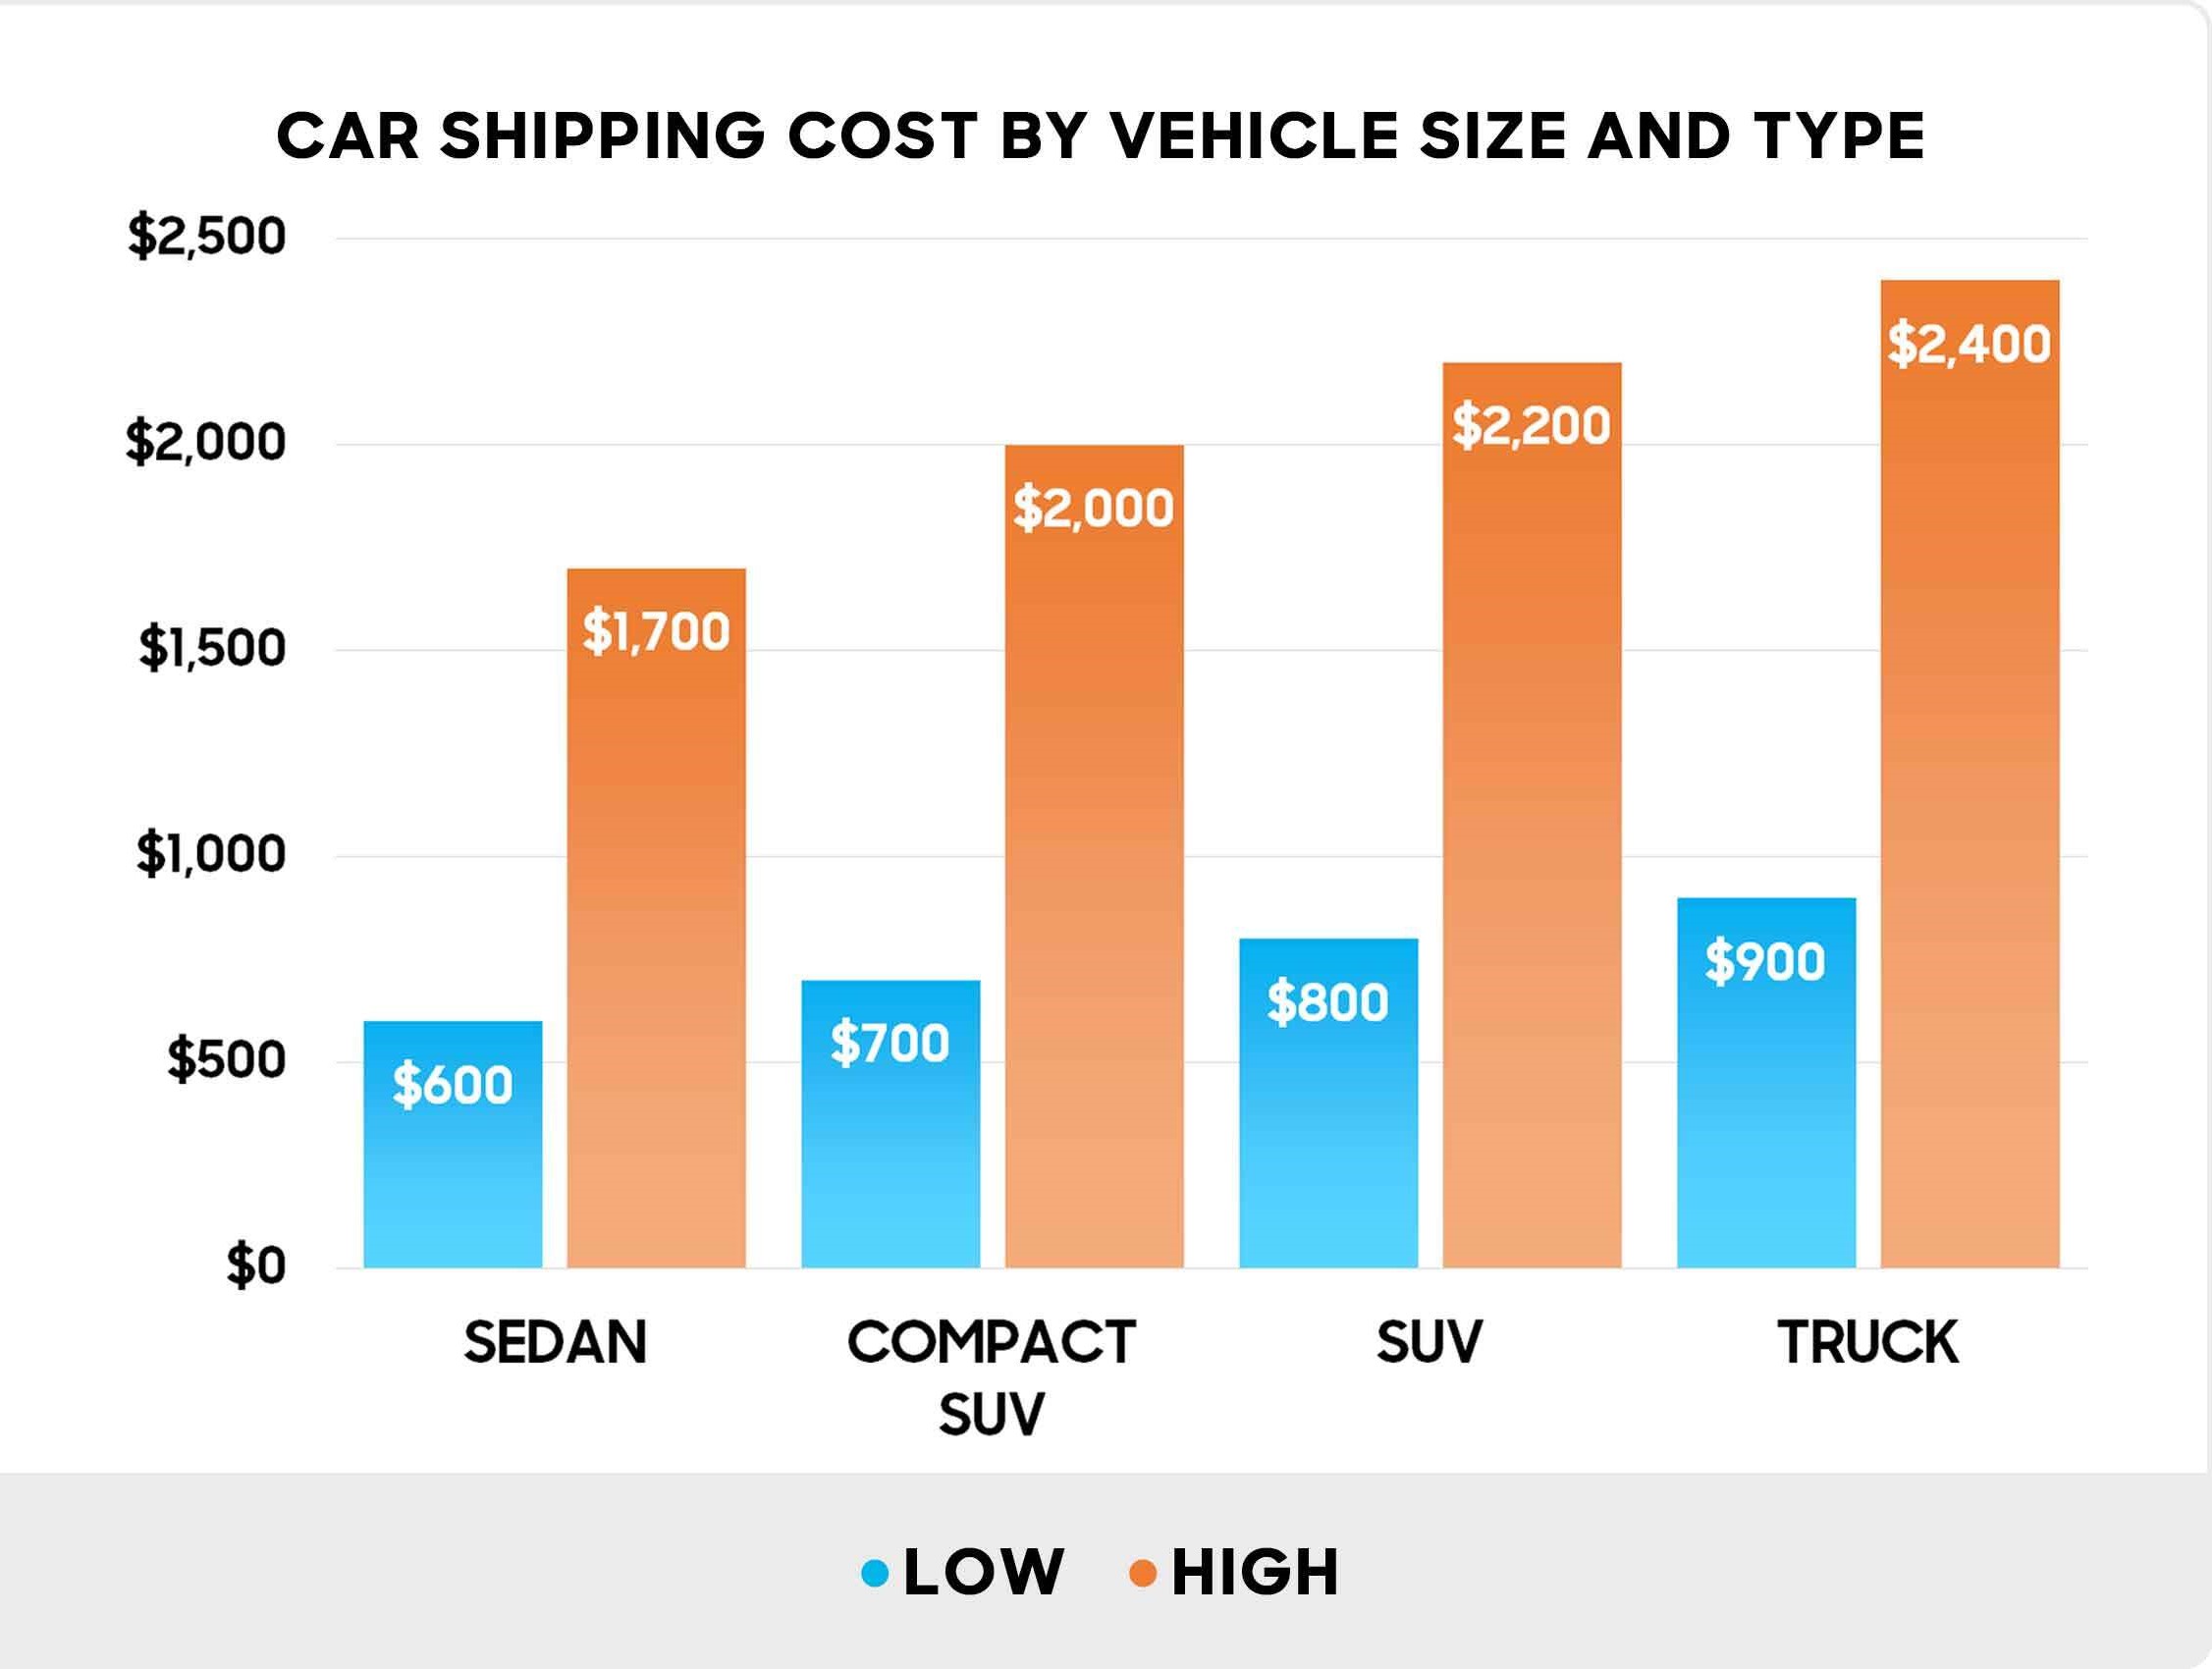 Car Shipping Cost by Vehicle Size and Type